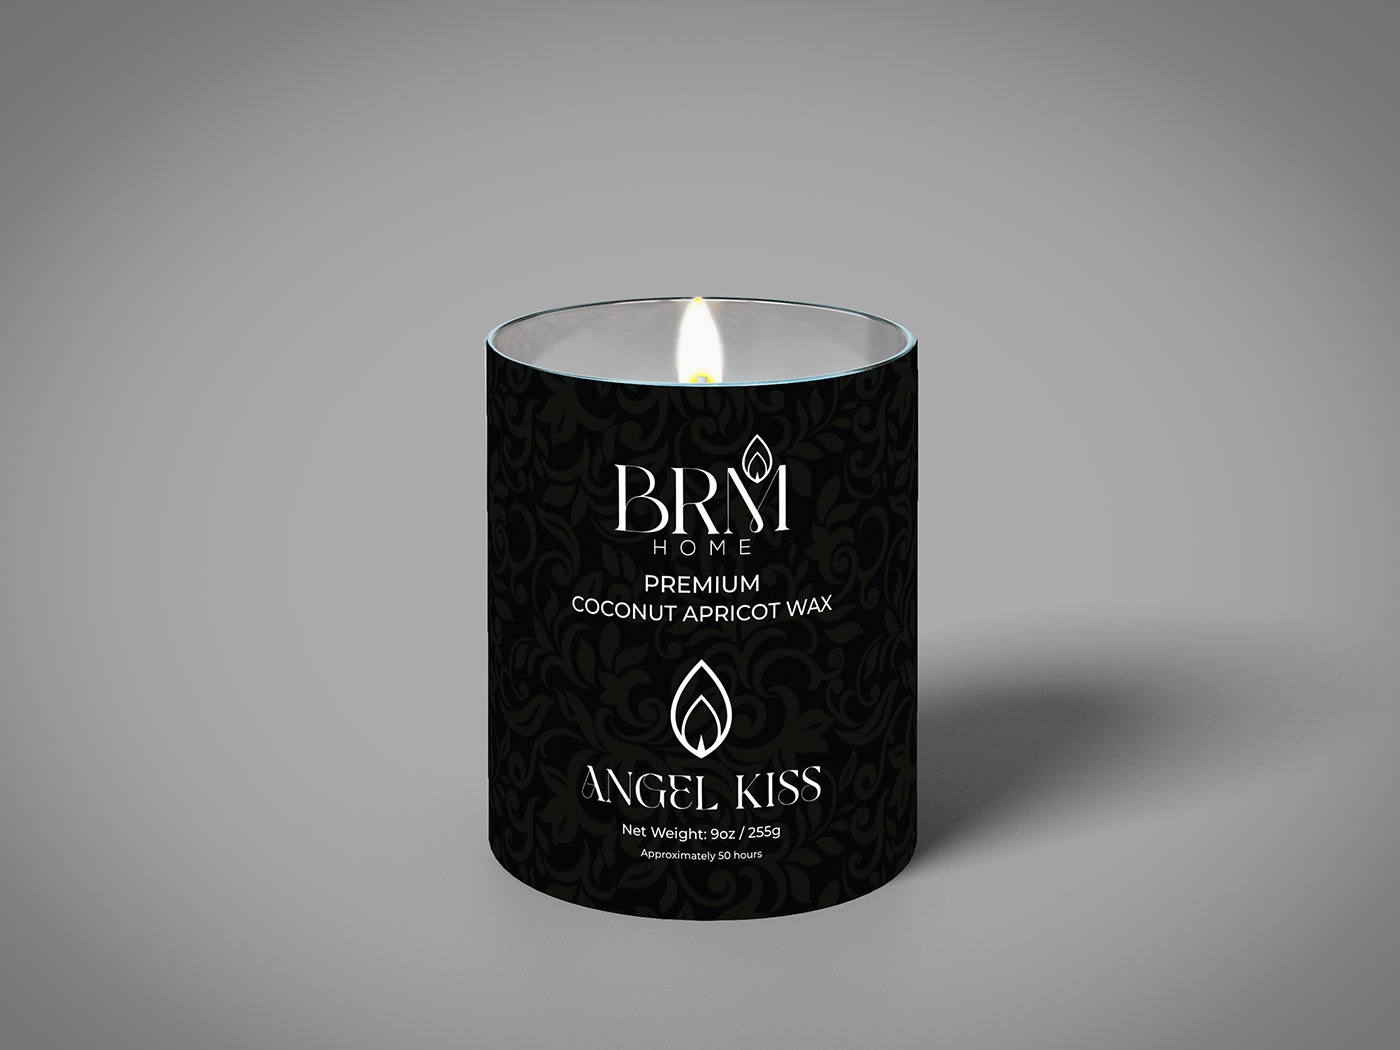 candle Packaging product design  label design product packaging package design  Jar labels packaging design candle jar labels jar labels design